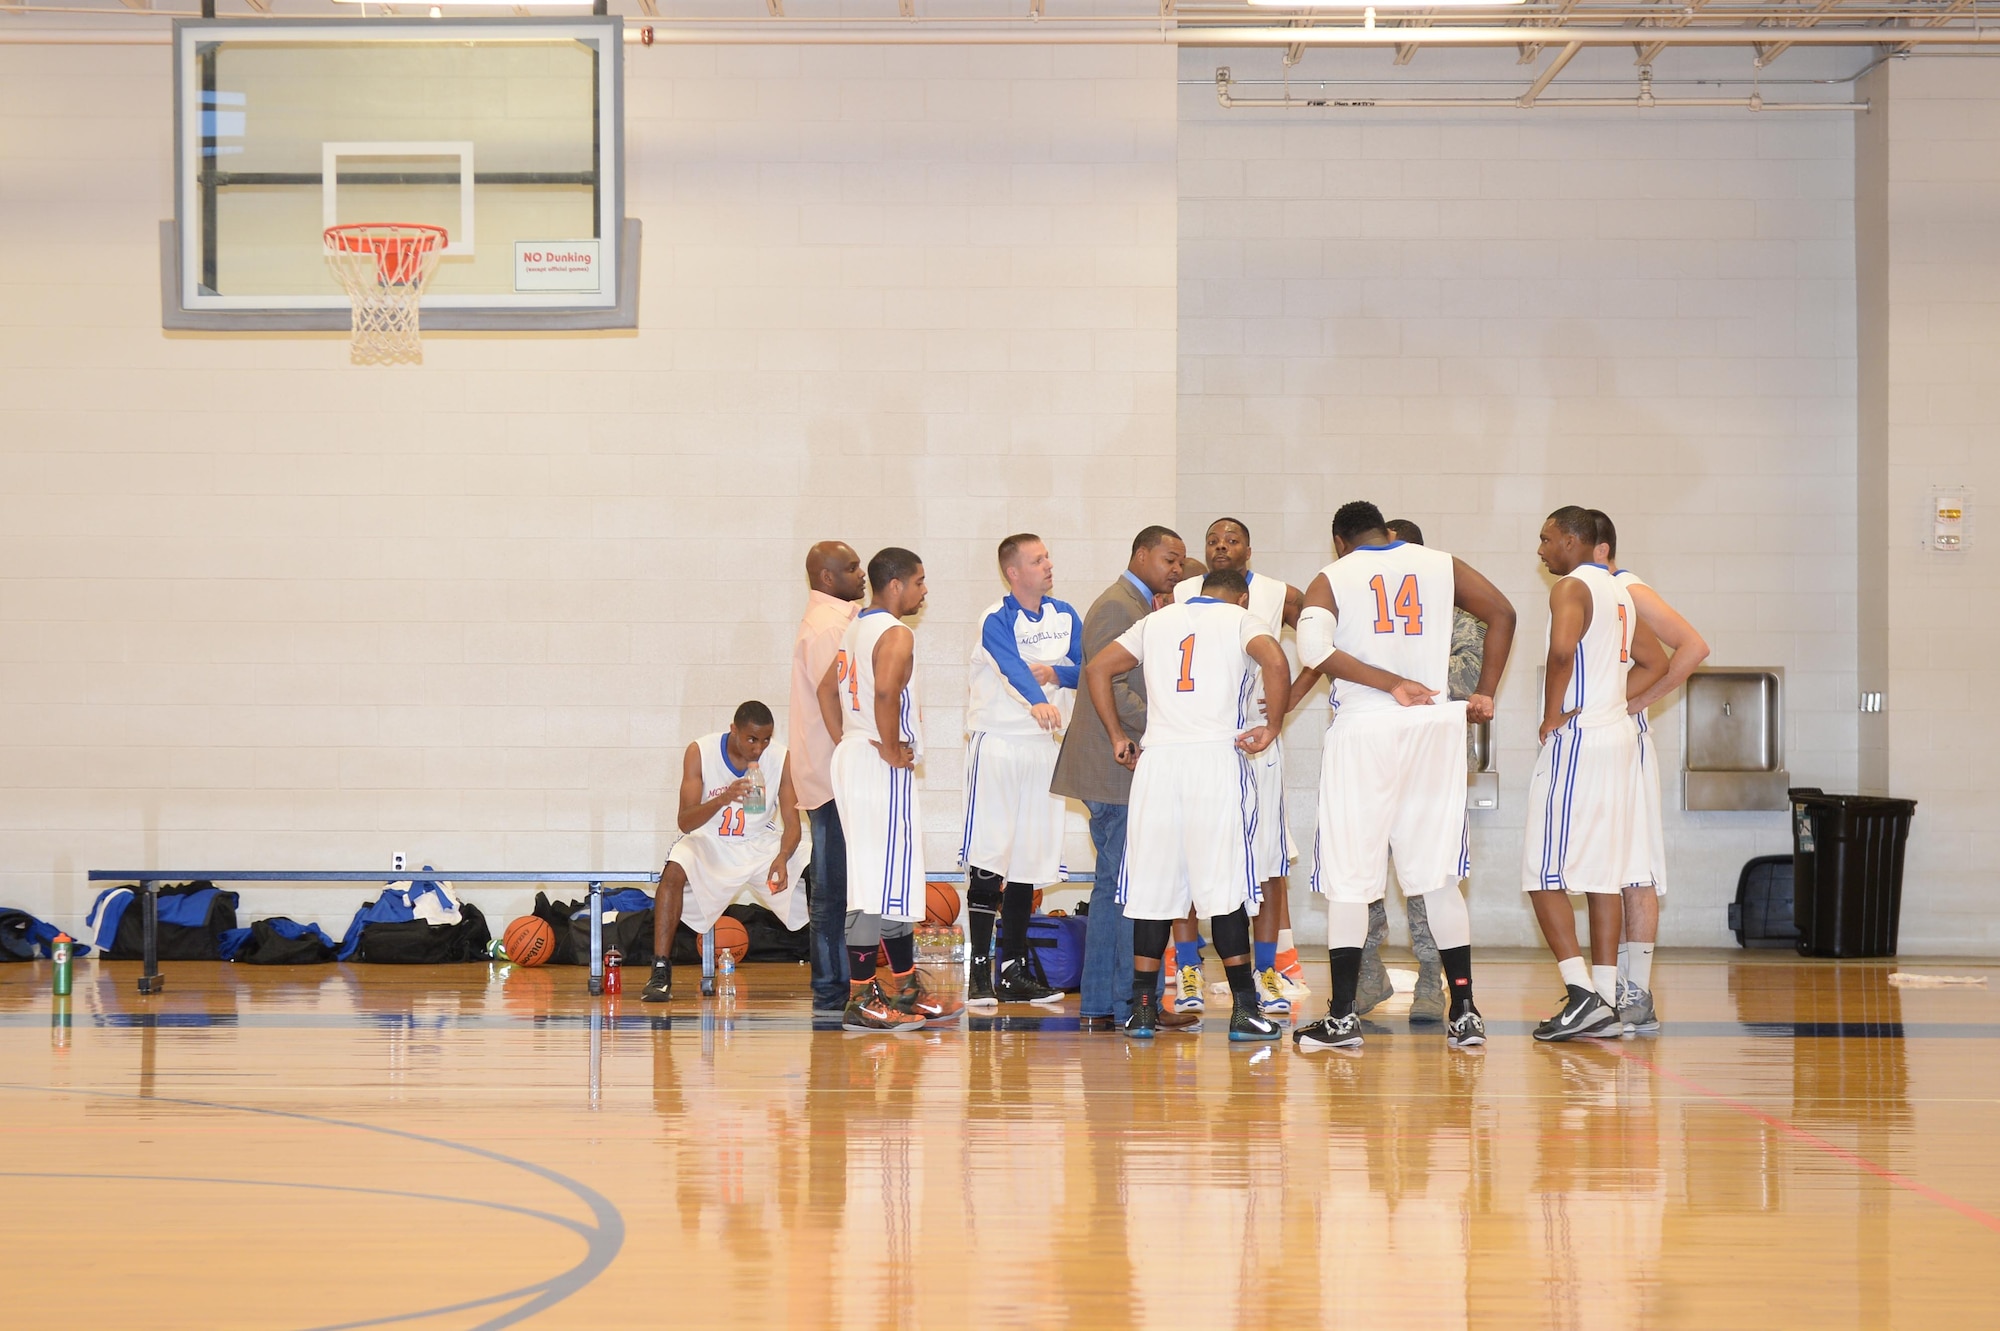 The McConnell Tornadoes huddle during half-time of a game with the Tinker Hawks, Oct. 17, 2015, at McConnell Air Force Base, Kan. The team focuses on communication to be effective on the court and while performing the mission as Airmen. (U.S. Air Force photo/Senior Airman Colby L. Hardin)